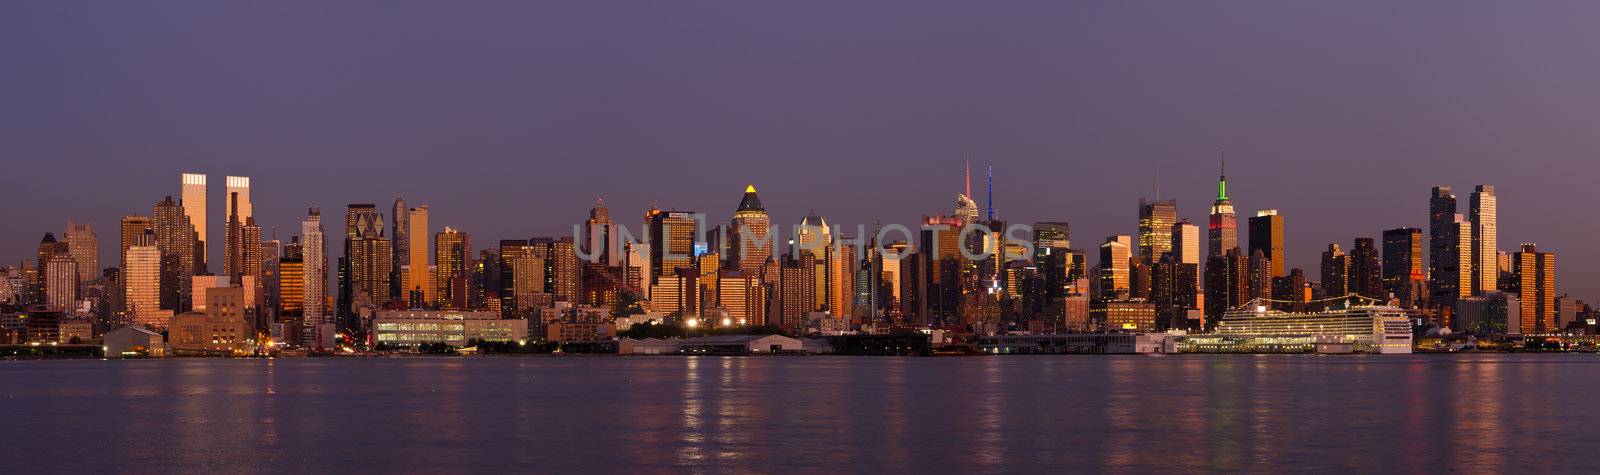 Panorama of Midtown Manhattan skyline and the Hudson River at sunset, New York City, New York, USA by CharlesBolin